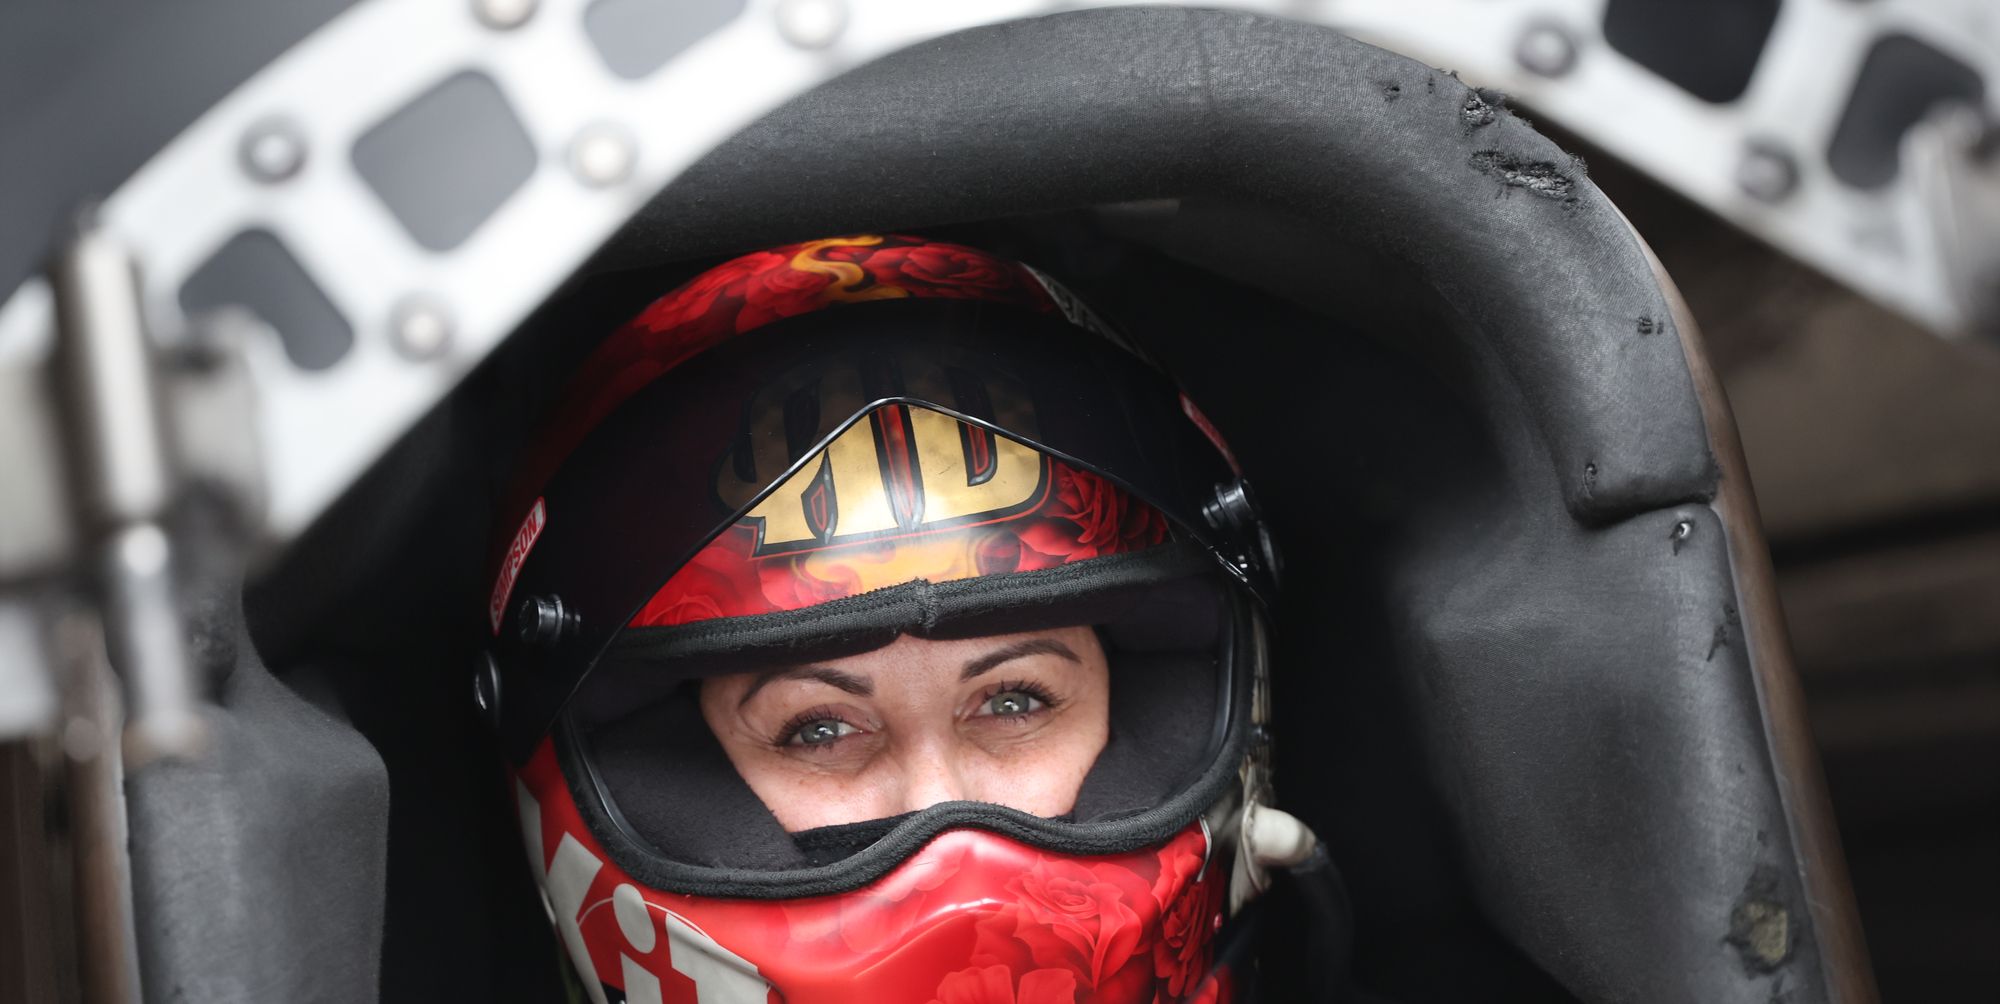 Where to Livestream Alexis DeJoria Launch of Her NHRA Top Fuel Dragster on Feb. 9